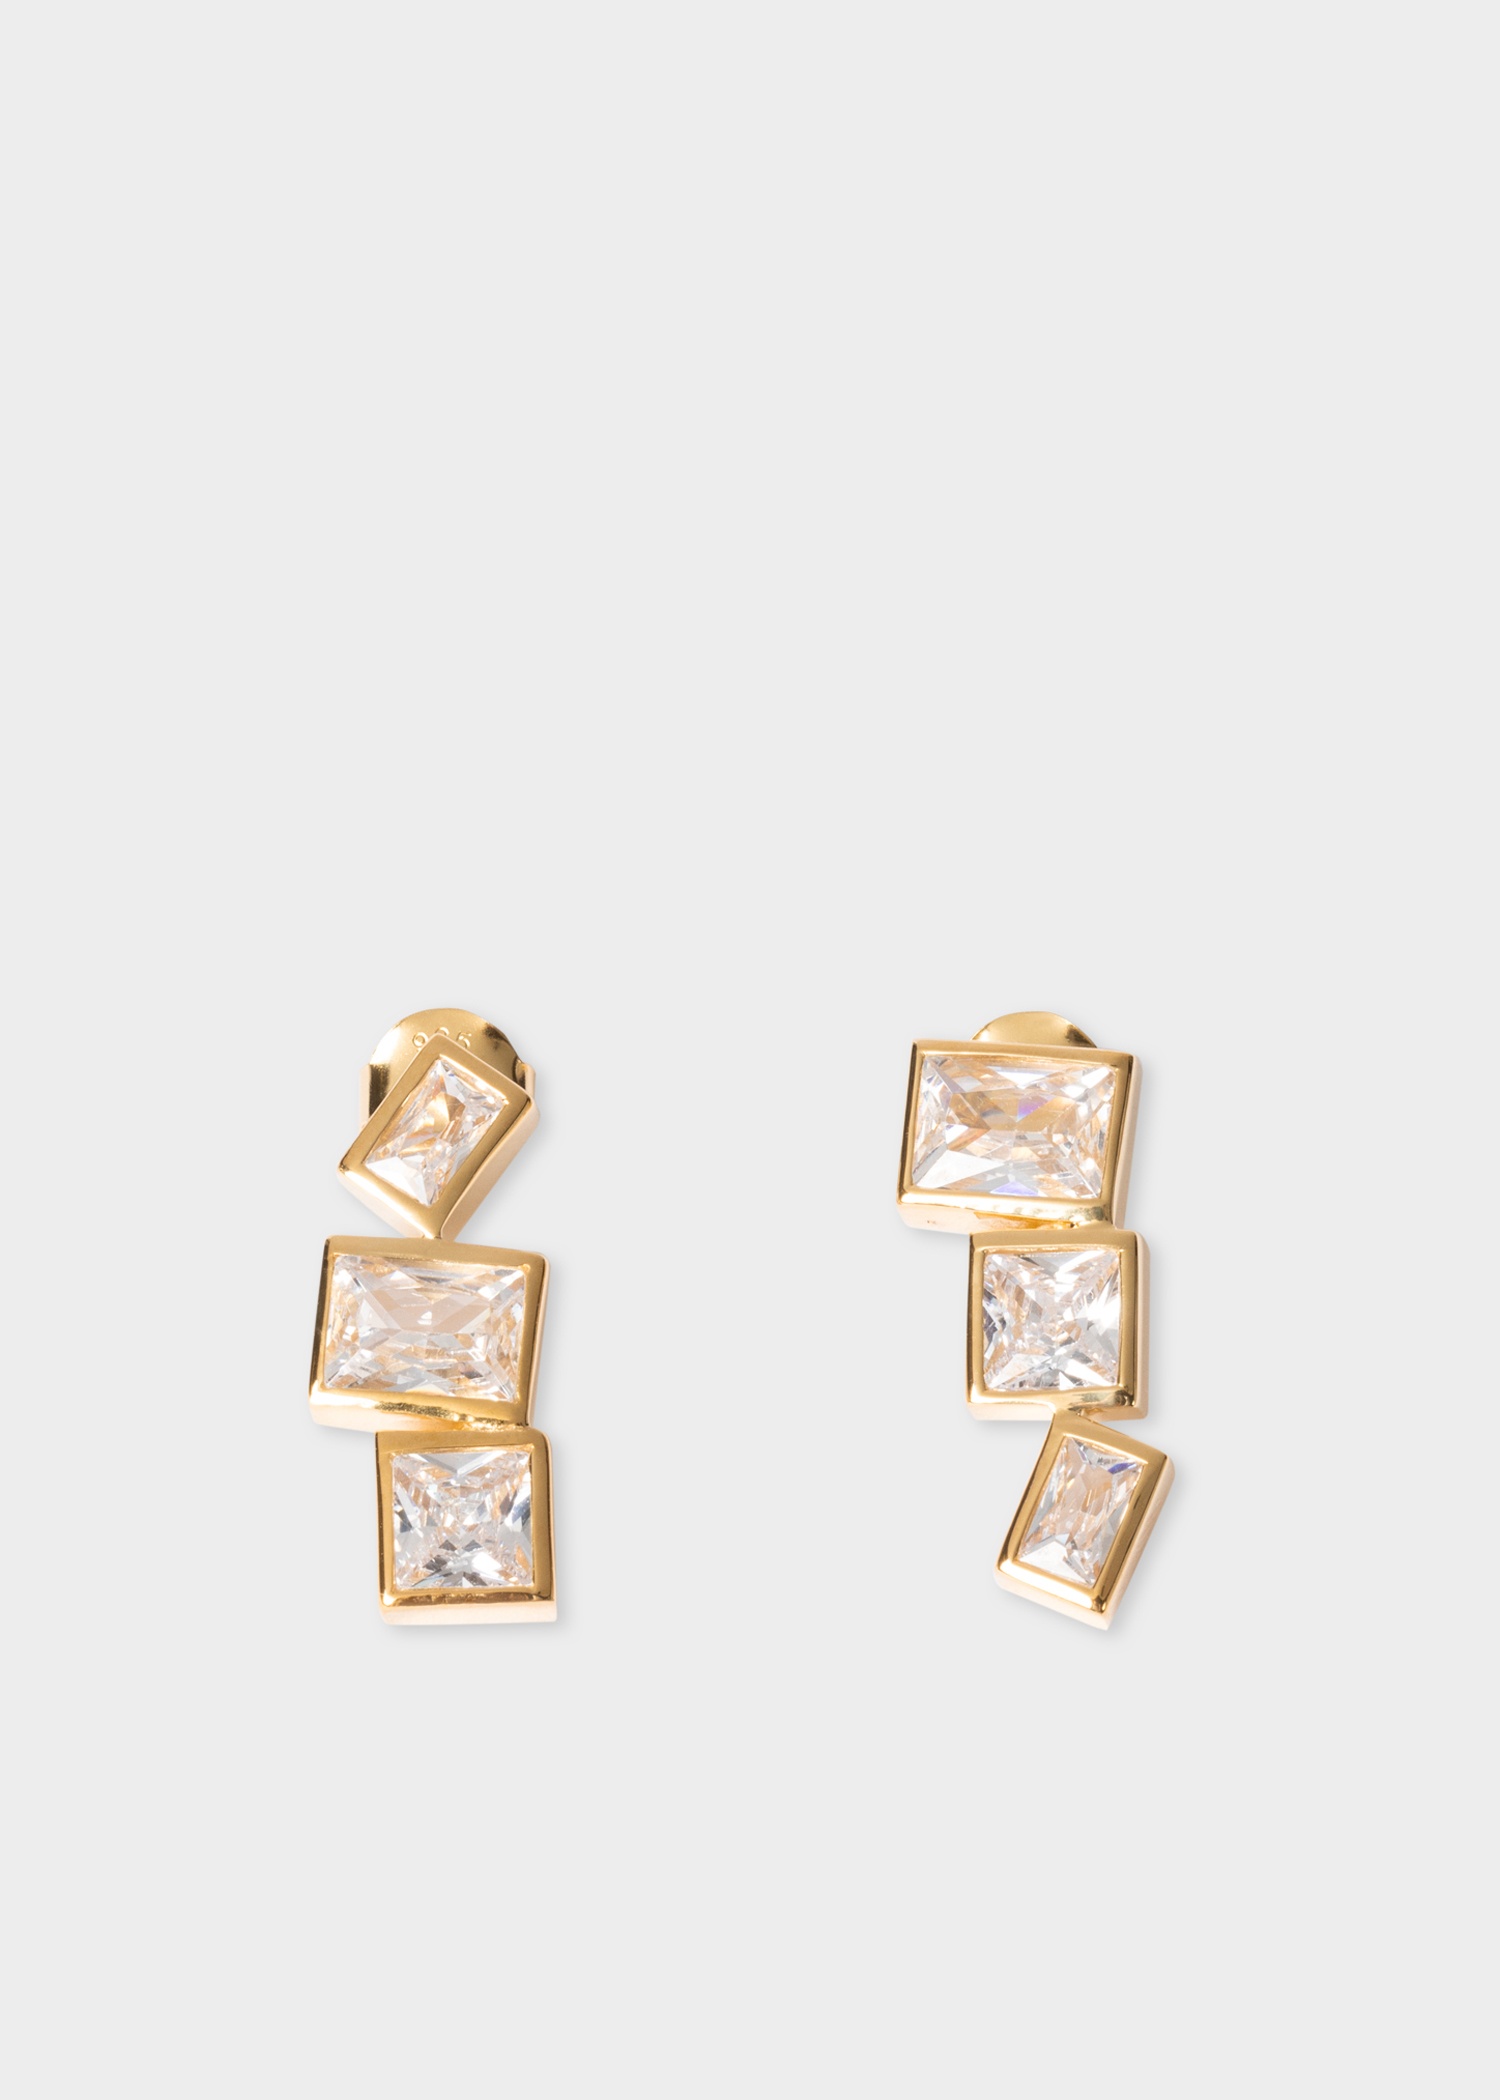 Cubic Zirconia & Gold Drop Earrings by Completedworks - 1